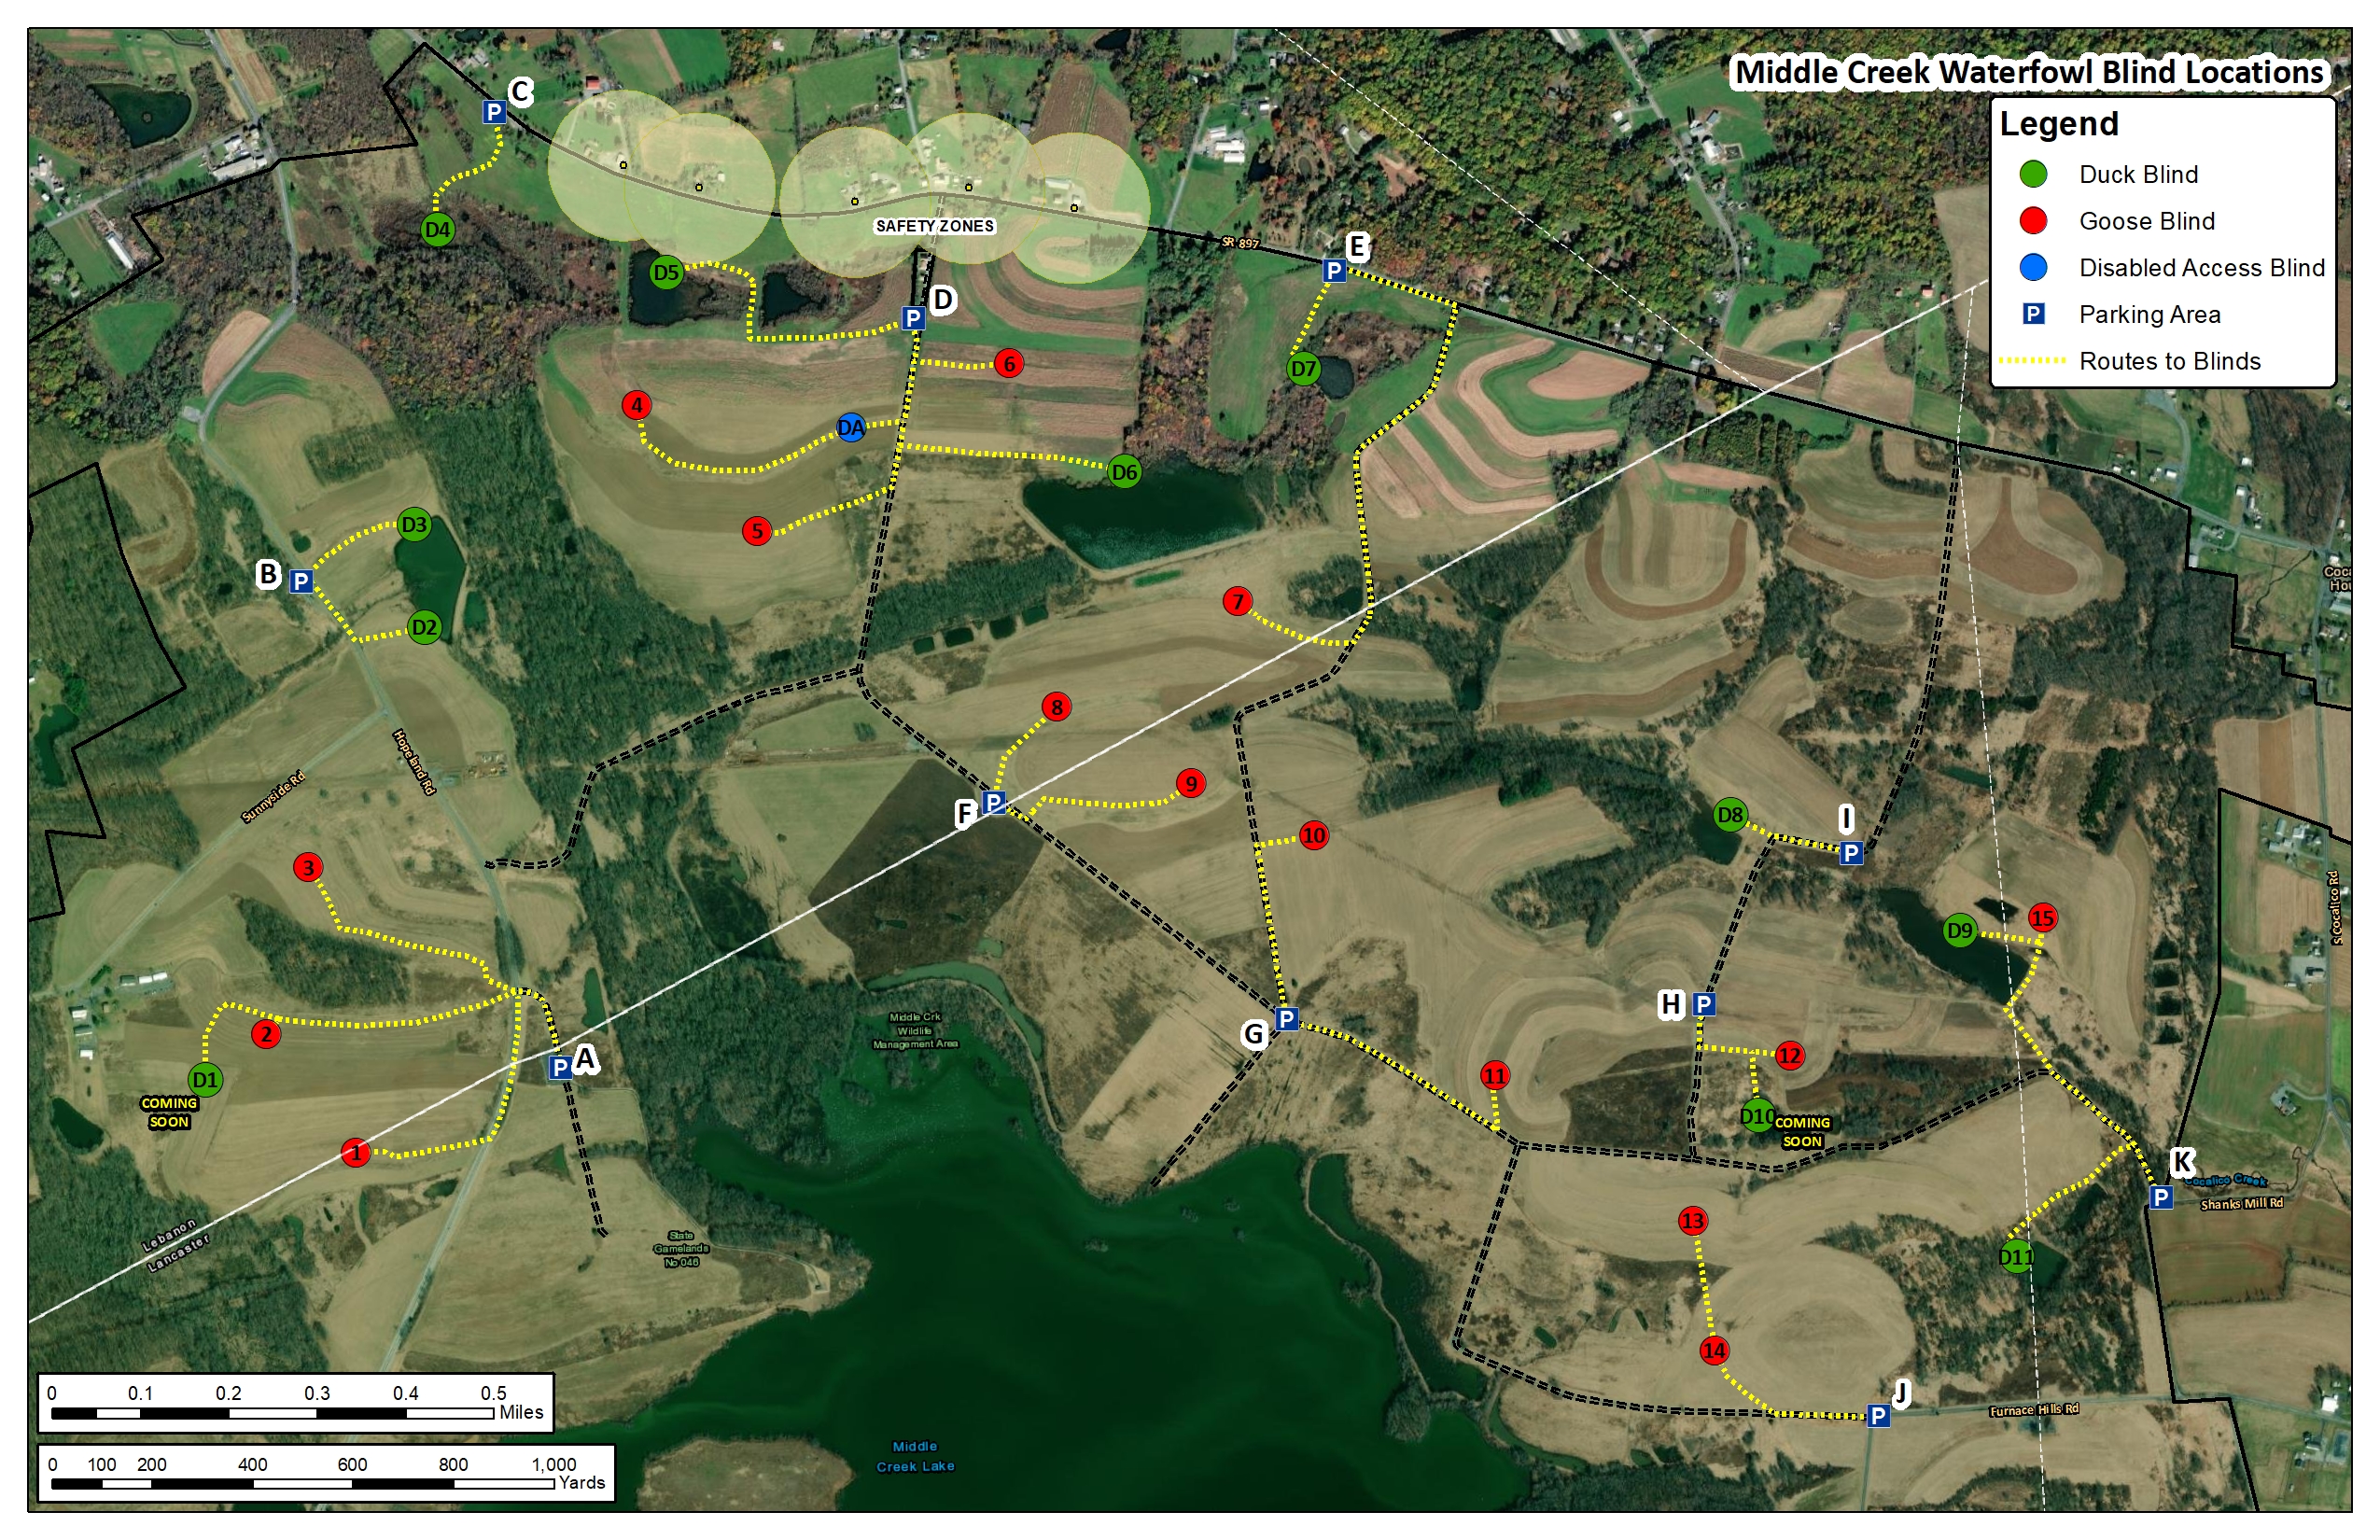 Middle Creek Waterfowl Blind Locations